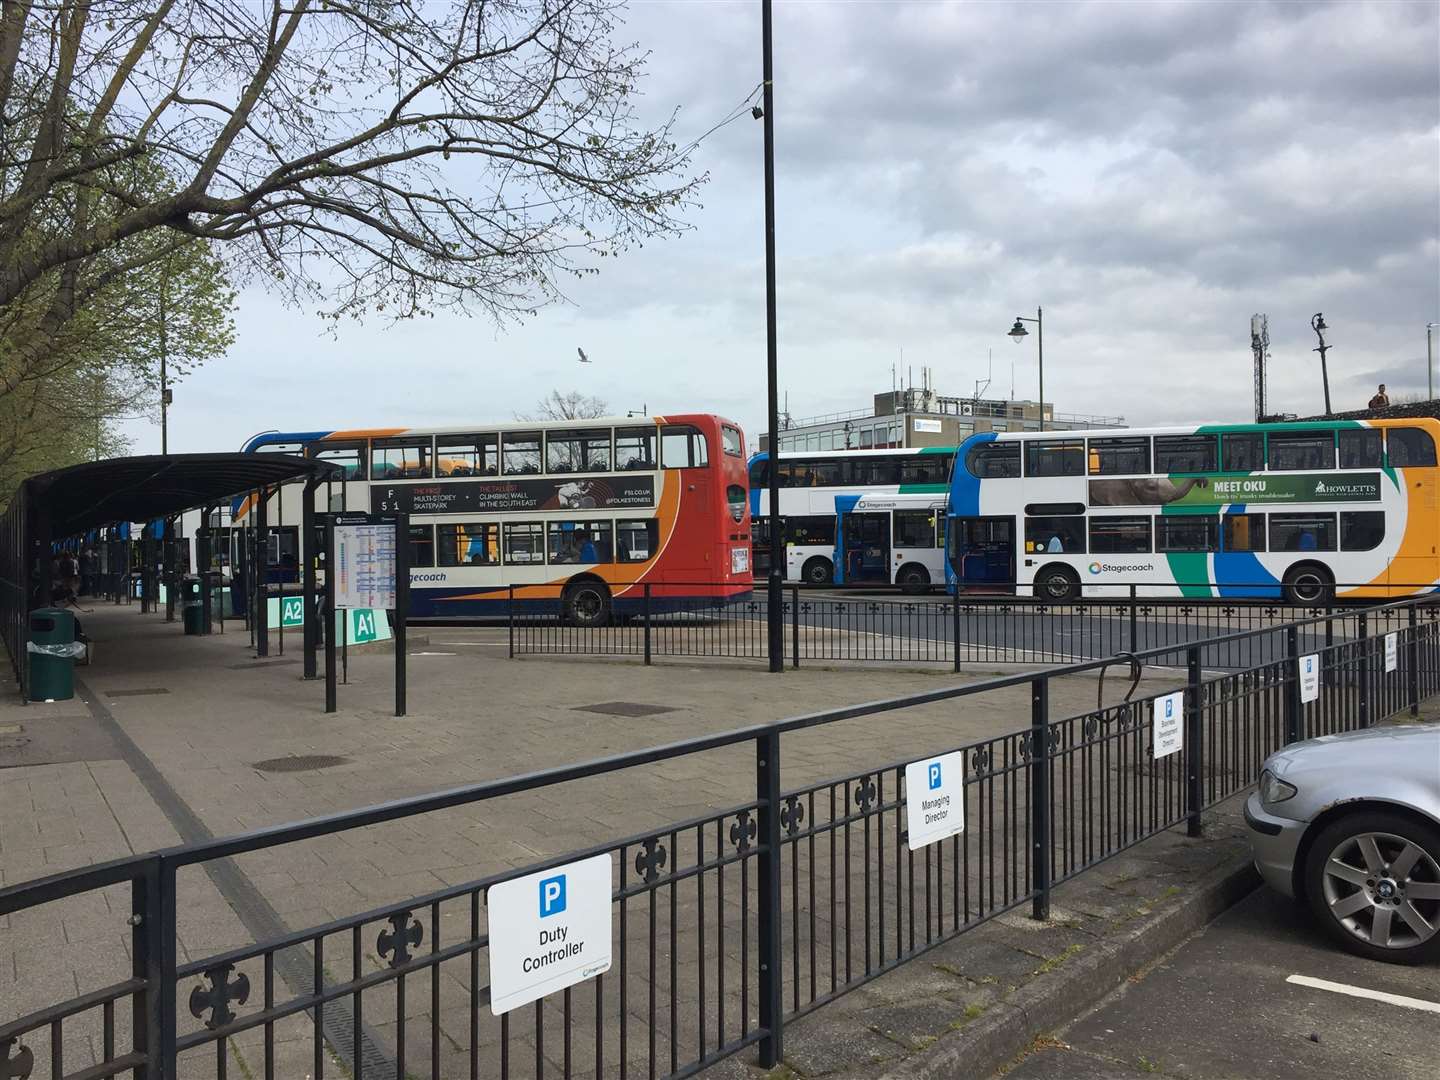 Stagecoach operates services from Canterbury bus station